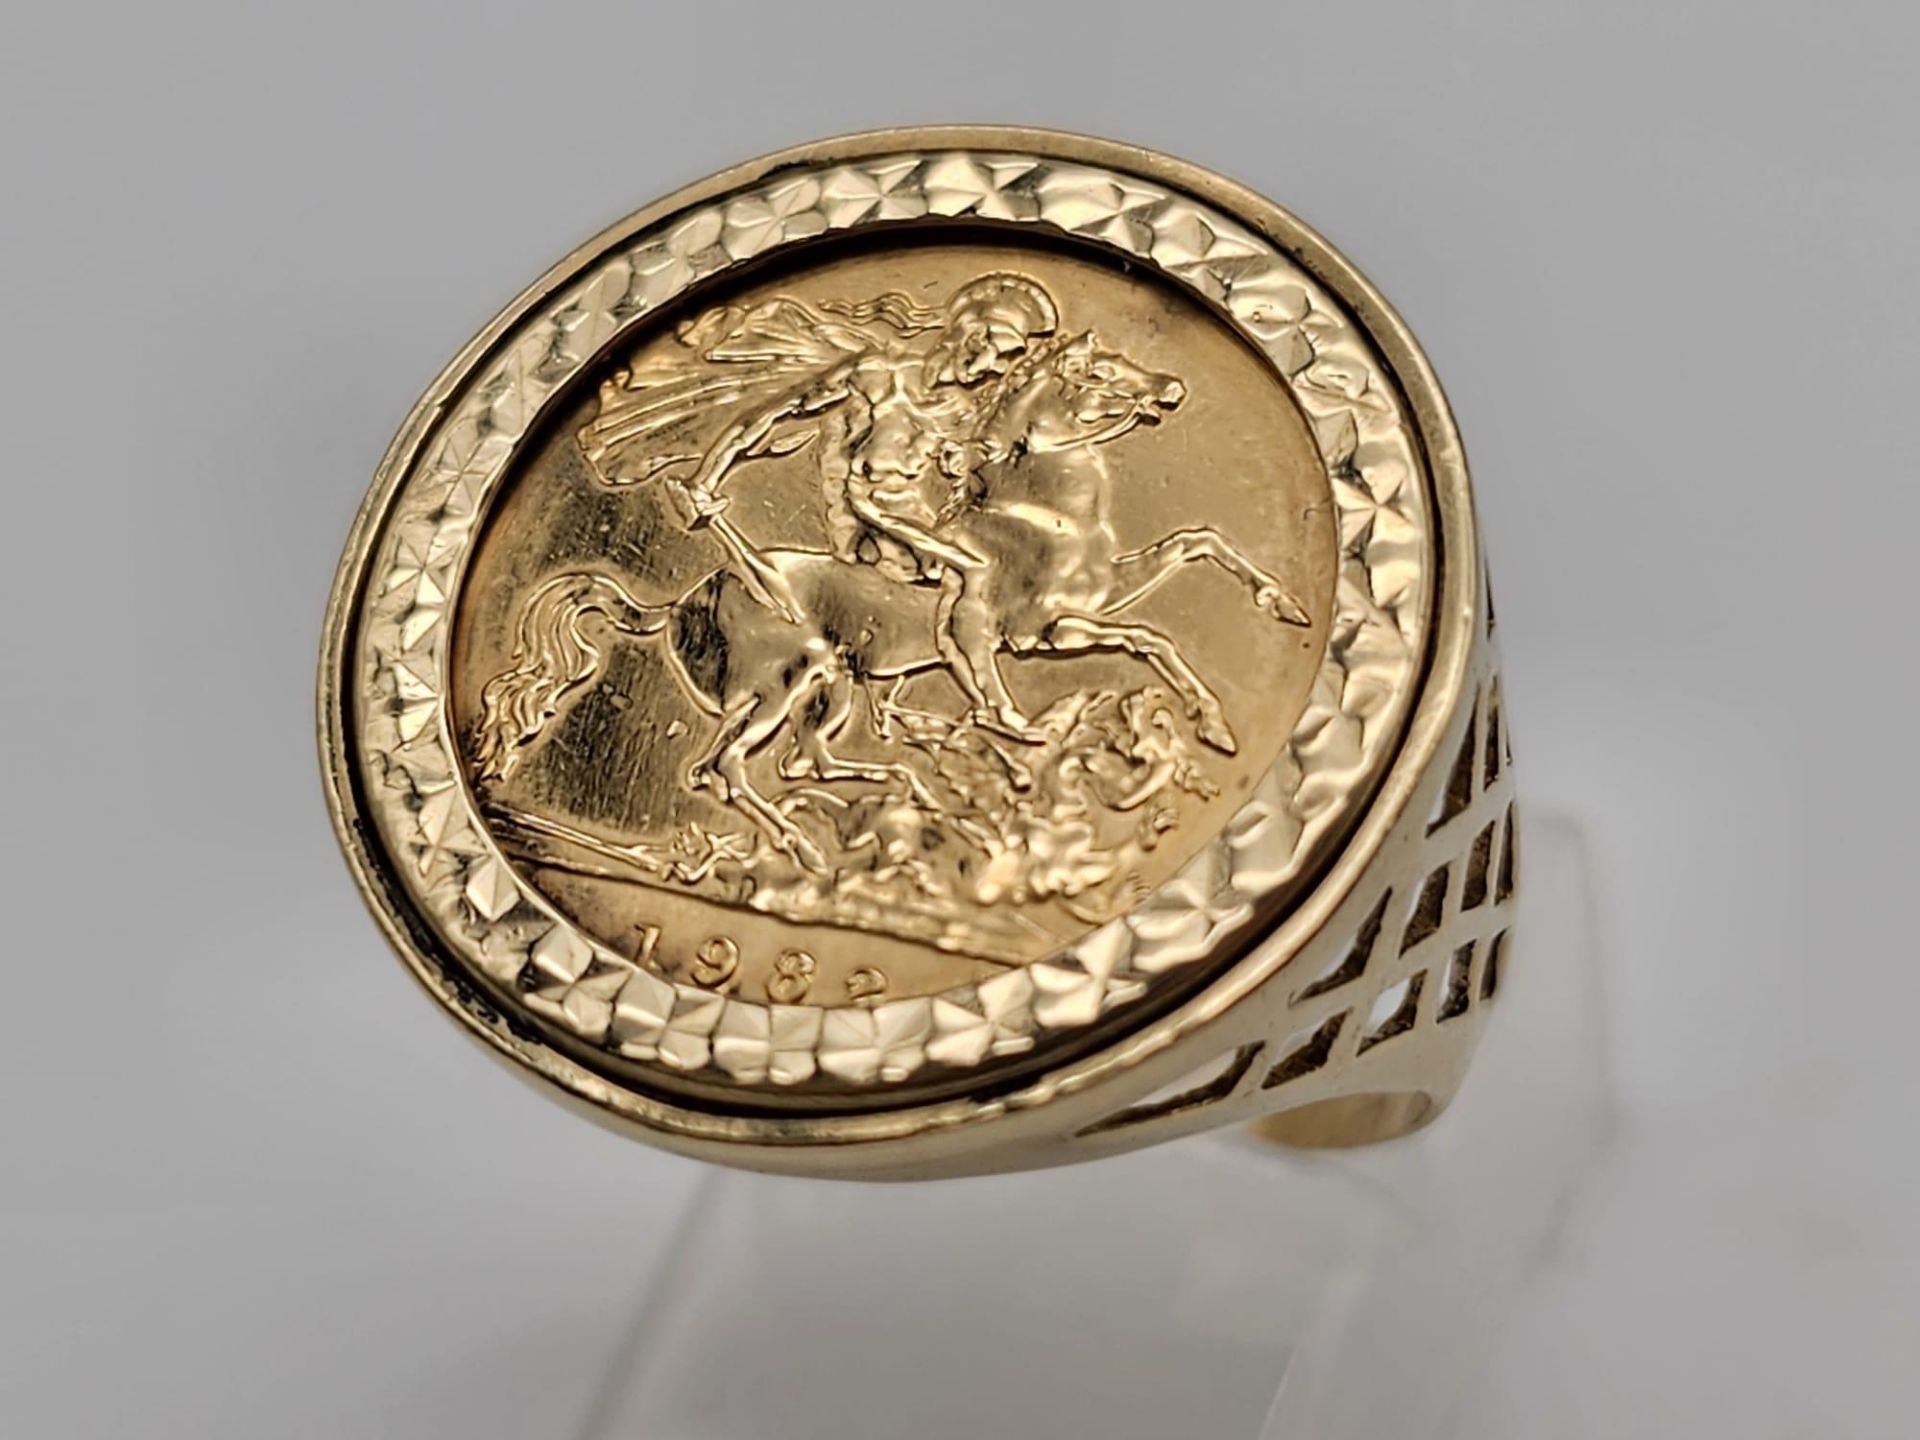 22k yellow gold half sovereign coin, dated 1982 with Queen Elizabeth, set into a 9k yellow gold ring - Bild 2 aus 8